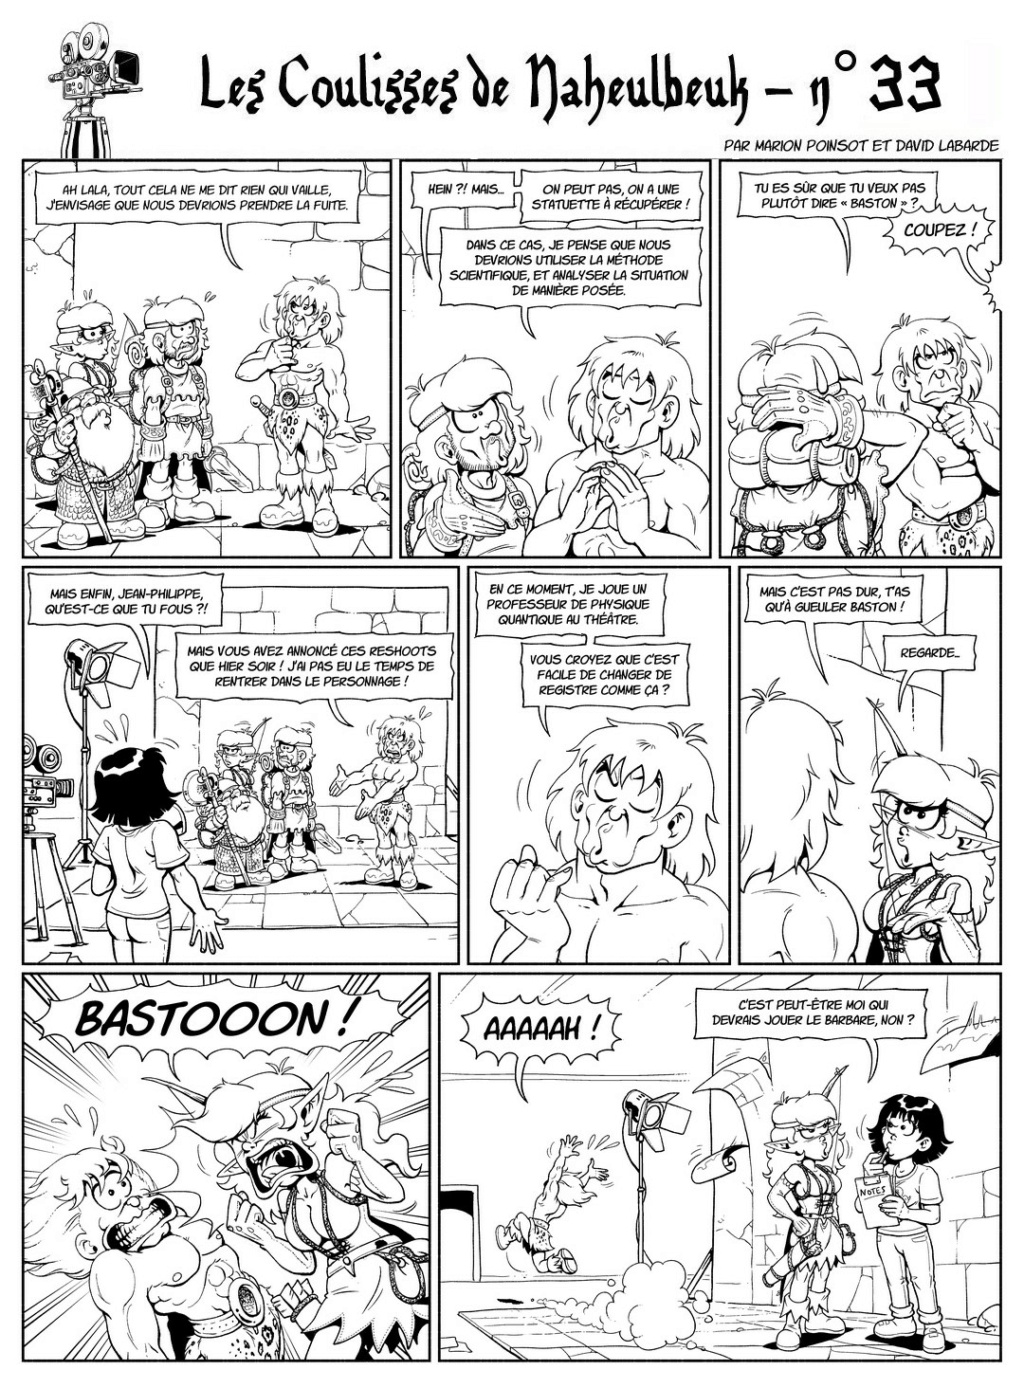 Ma page Tipeee ! - Page 4 Strip312